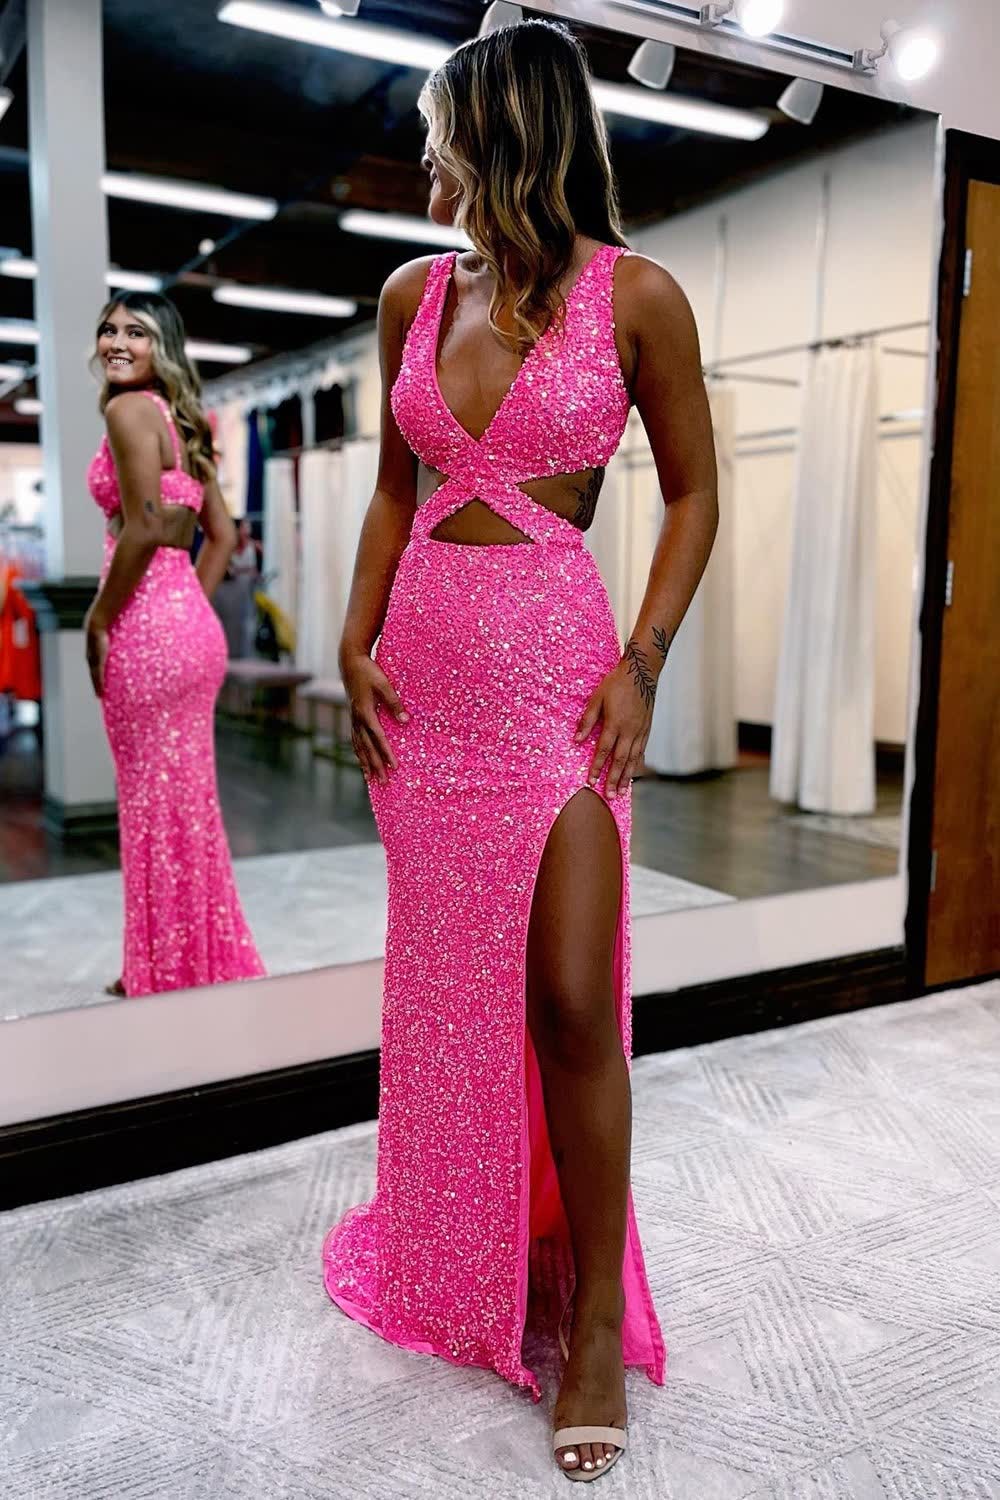 Hot Pink Sequins Hollow-Out Mermaid Corset Prom Dress outfits, Hot Pink Sequins Hollow-Out Mermaid Prom Dress